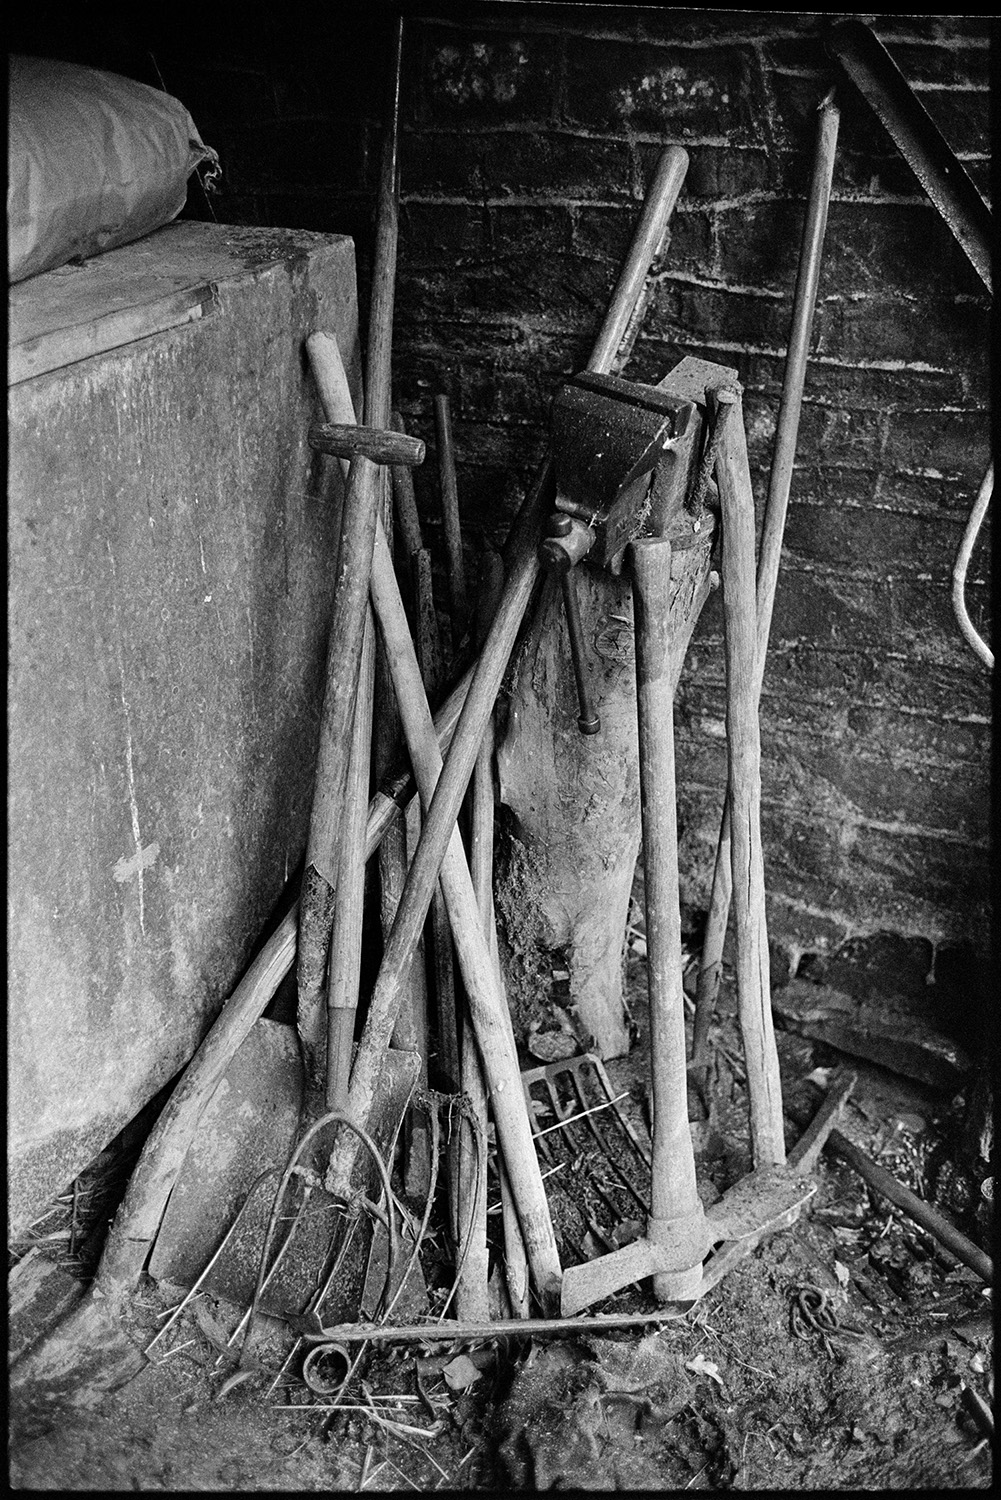 Tools and bits and pieces in shed, box contained ferret! 
[Tools lent against the wall in Archie Parkhouse's shed at Millhams, Dolton. The tools include forks, pickaxes and a hoe.]